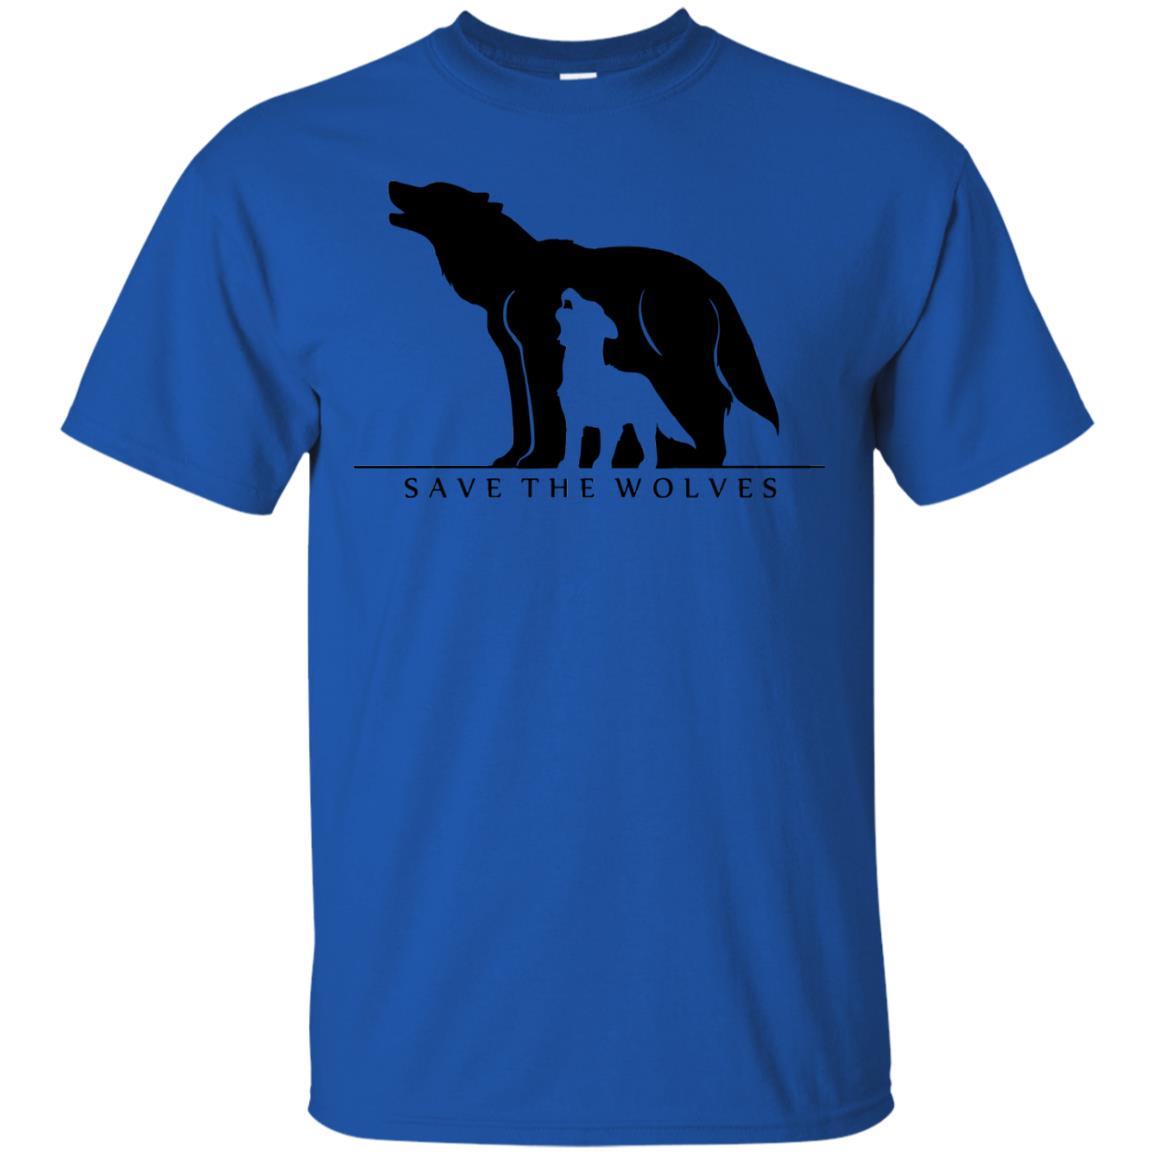 Save The Wolves Shirt - 10% Off - FavorMerch